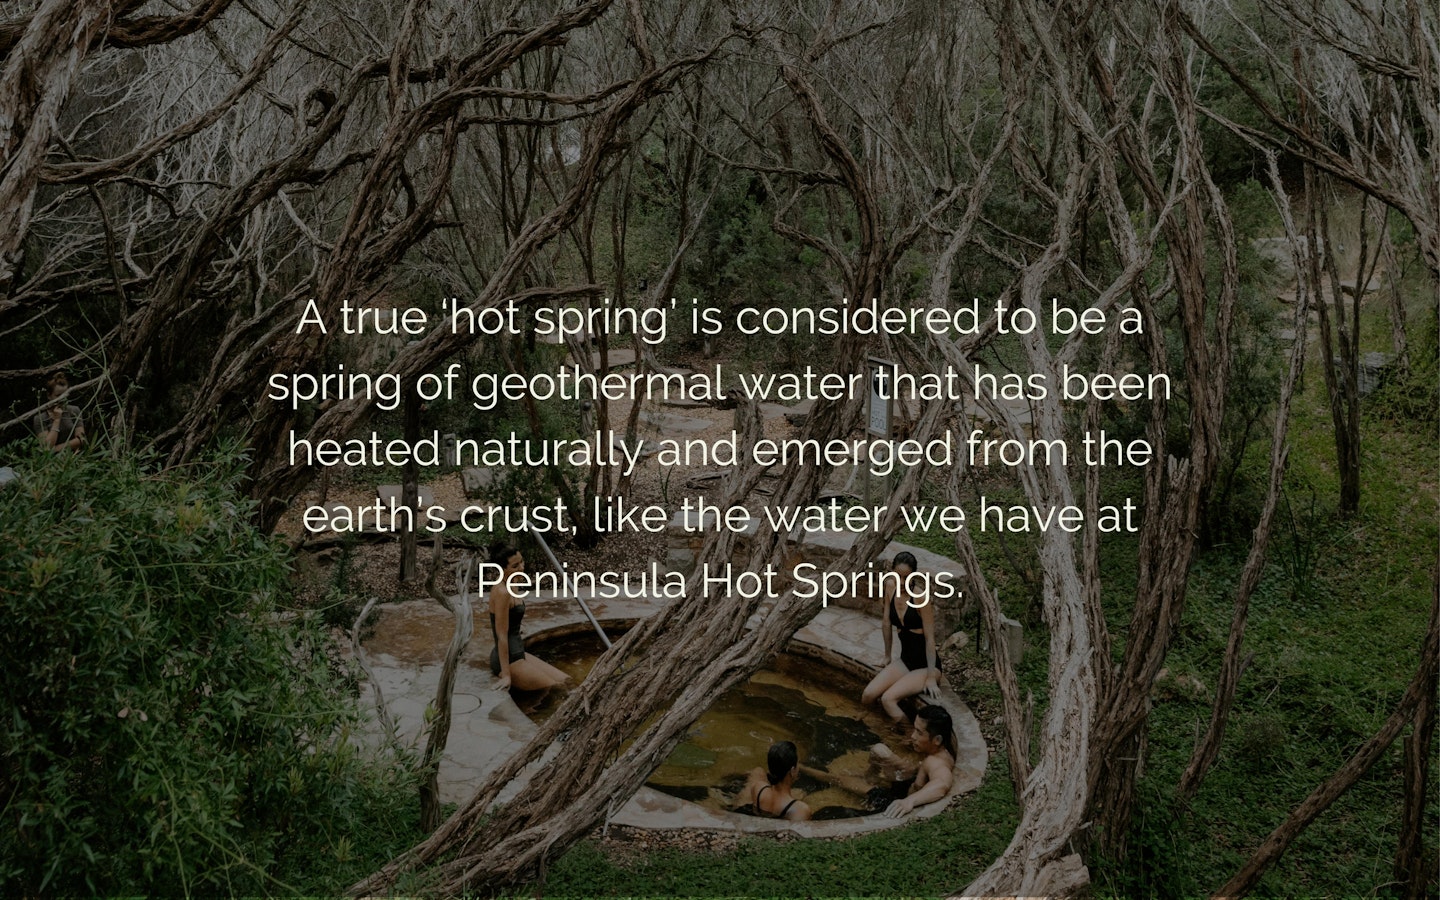 Text "A true ‘Hot Spring’ is considered to be a spring of geothermal water that has been heated naturally and emerged from the earth’s crust, like the water we have at Peninsula Hot Springs" overlaying an image of four friends in a geothermal spa